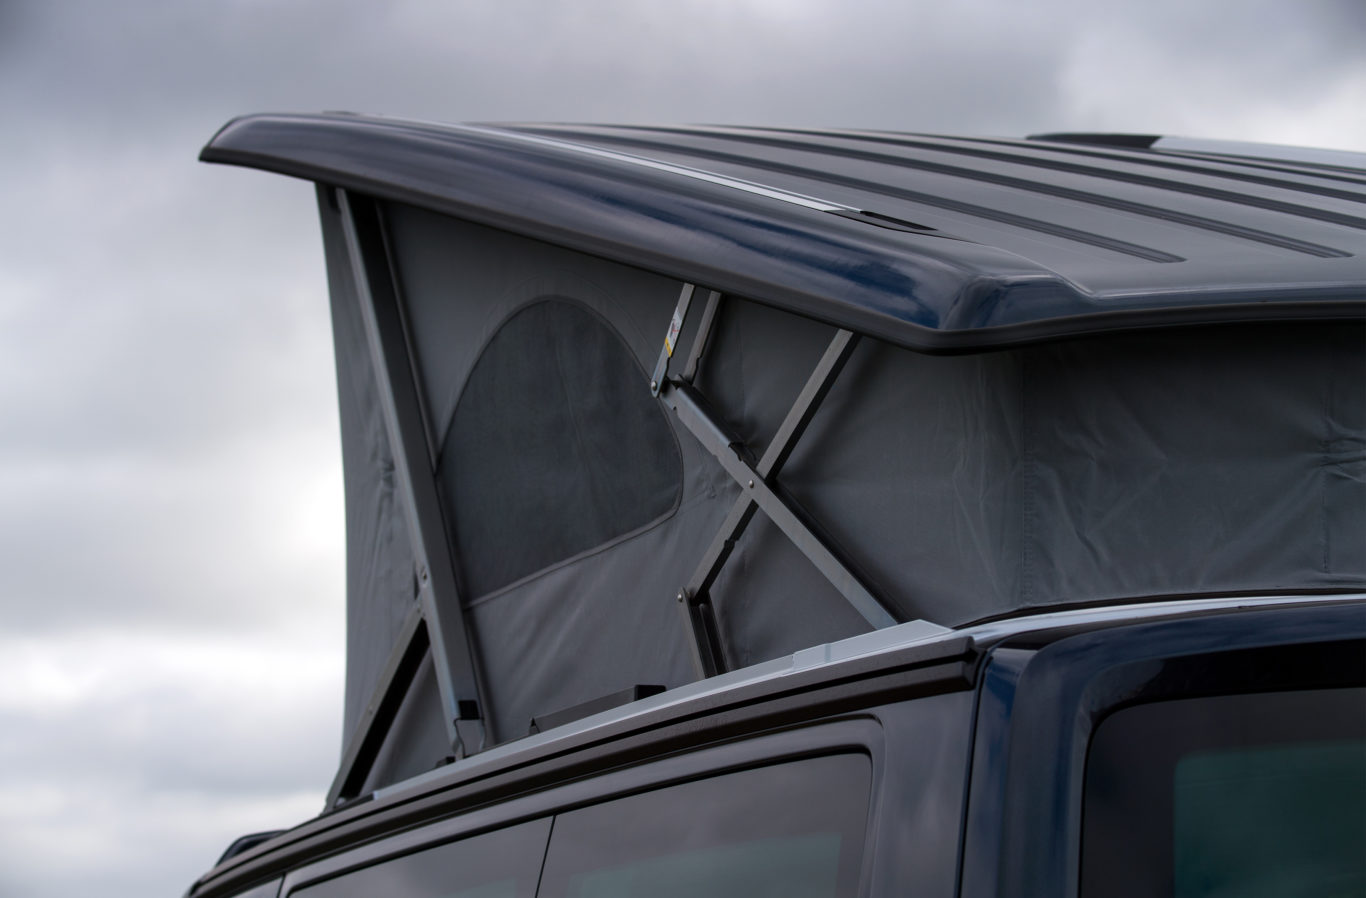 A pop-top roof gives better headroom and additional sleeping areas